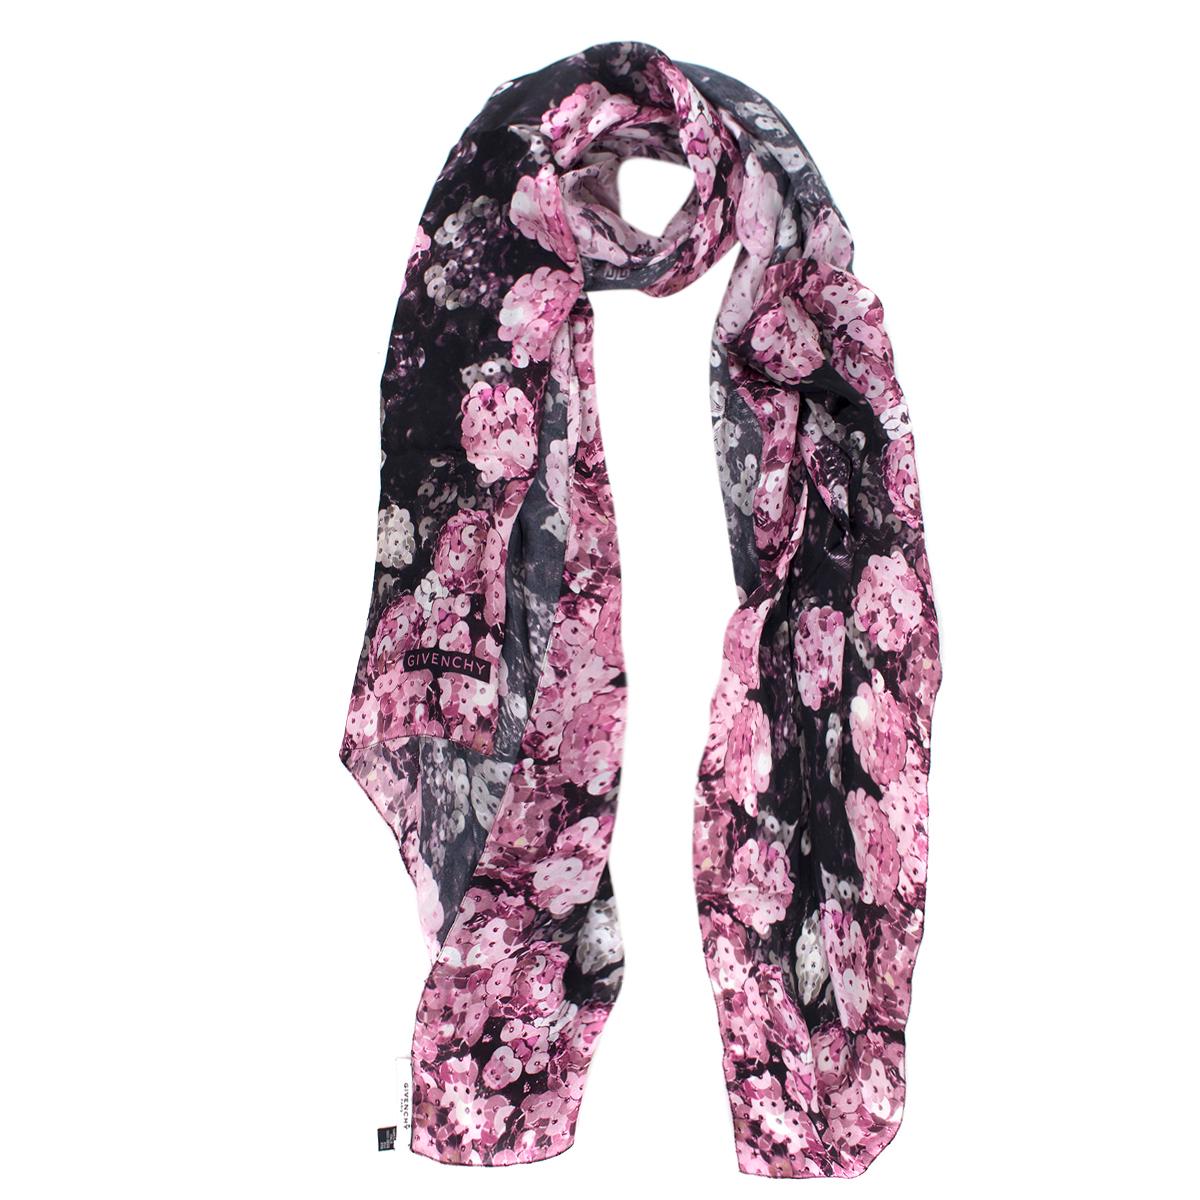 Givenchy Silk Sequin Floral Print Black & Pink Scarf

- Silk sequin & floral pattern scarf
- Rectangular shape

Please note, these items are pre-owned and may show some signs of storage, even when unworn and unused. This is reflected within the